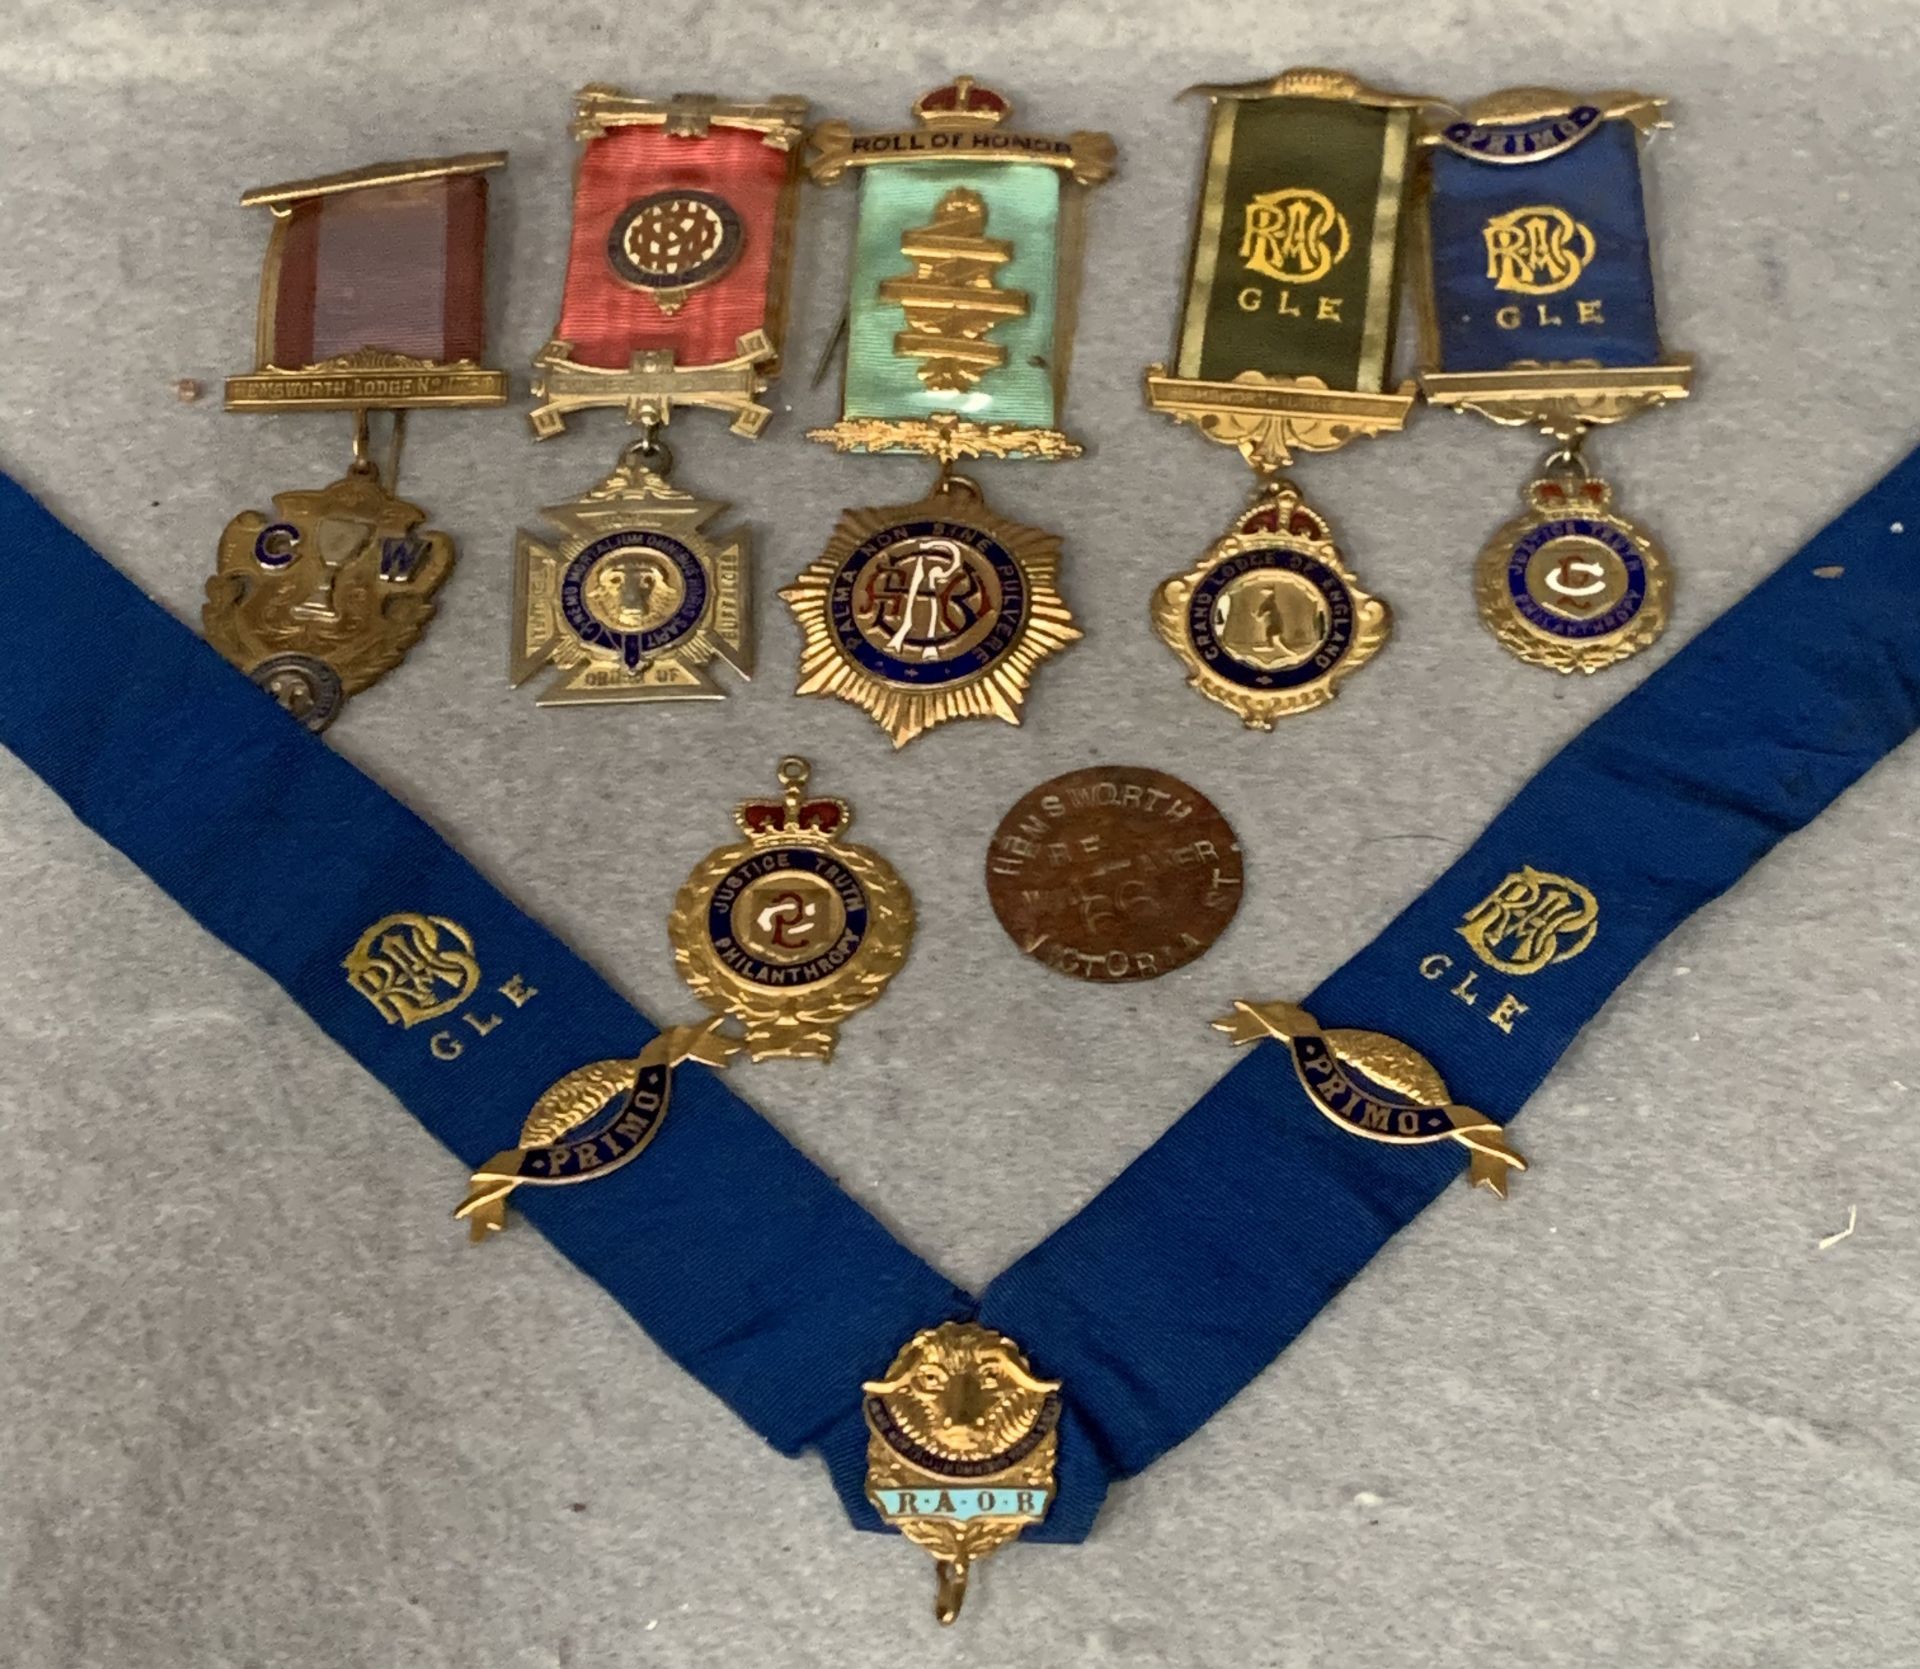 A collection of RAOB medals and badges,